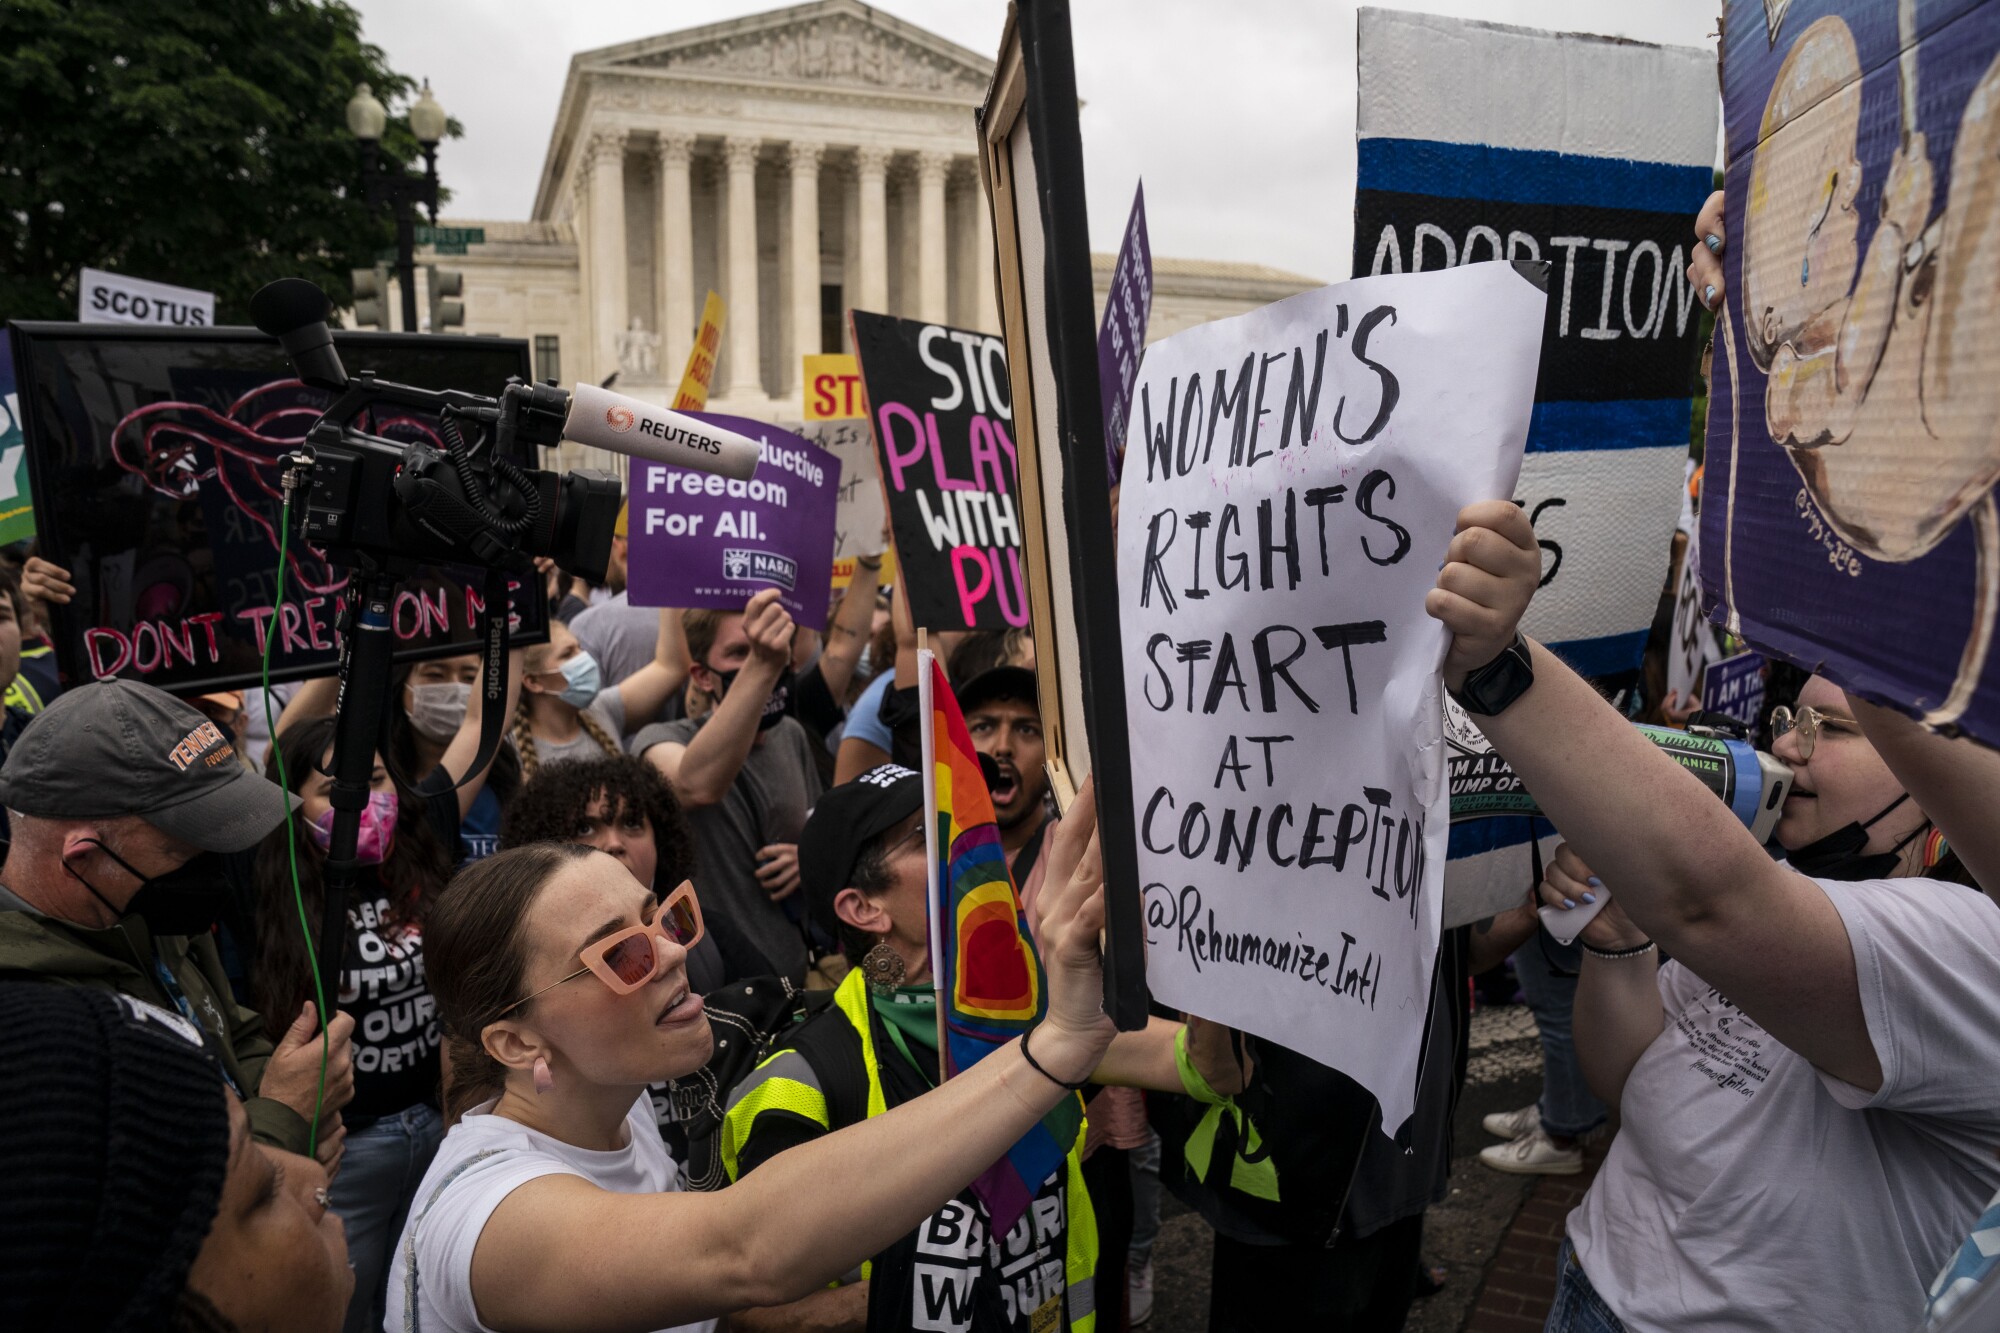 Abortion rights activists and anti-abortion activists yell at each other at a demonstration.